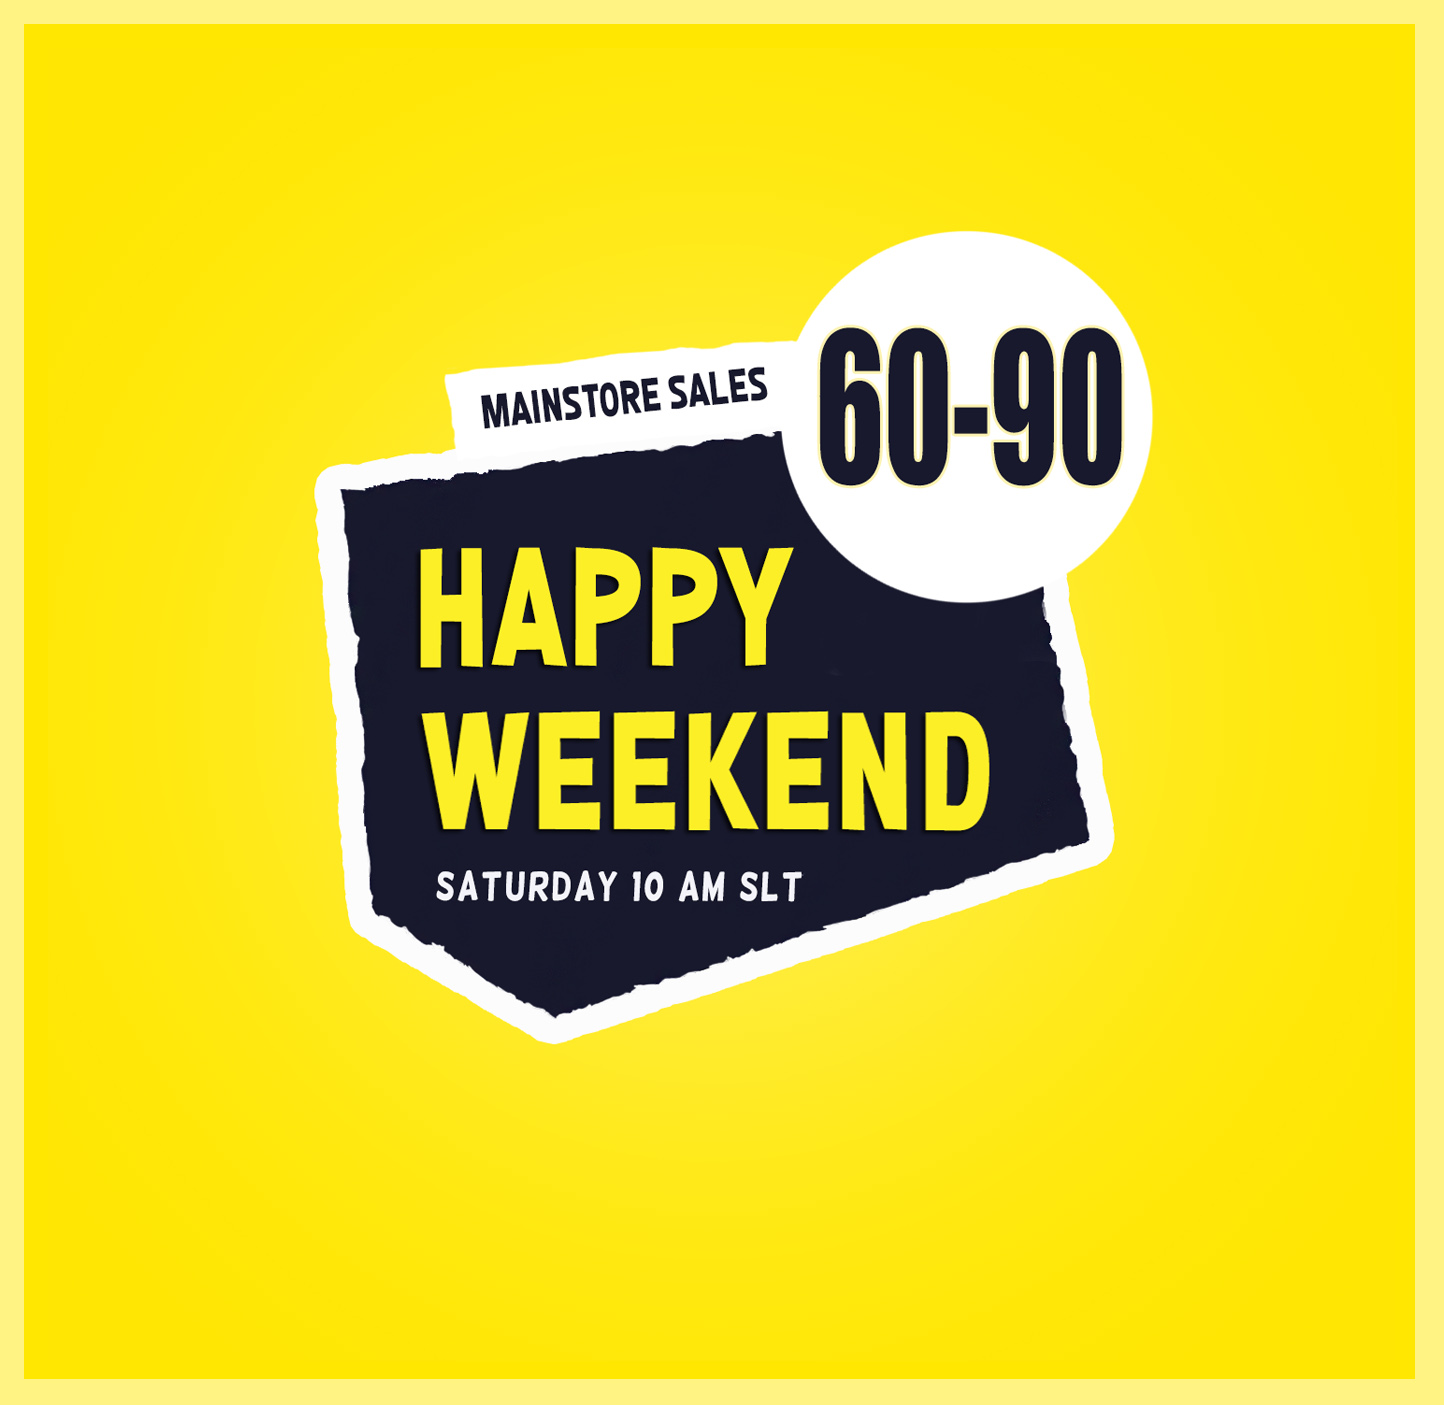 SMILING IS GUARANTEED WITH THE HAPPY WEEKEND SALE!